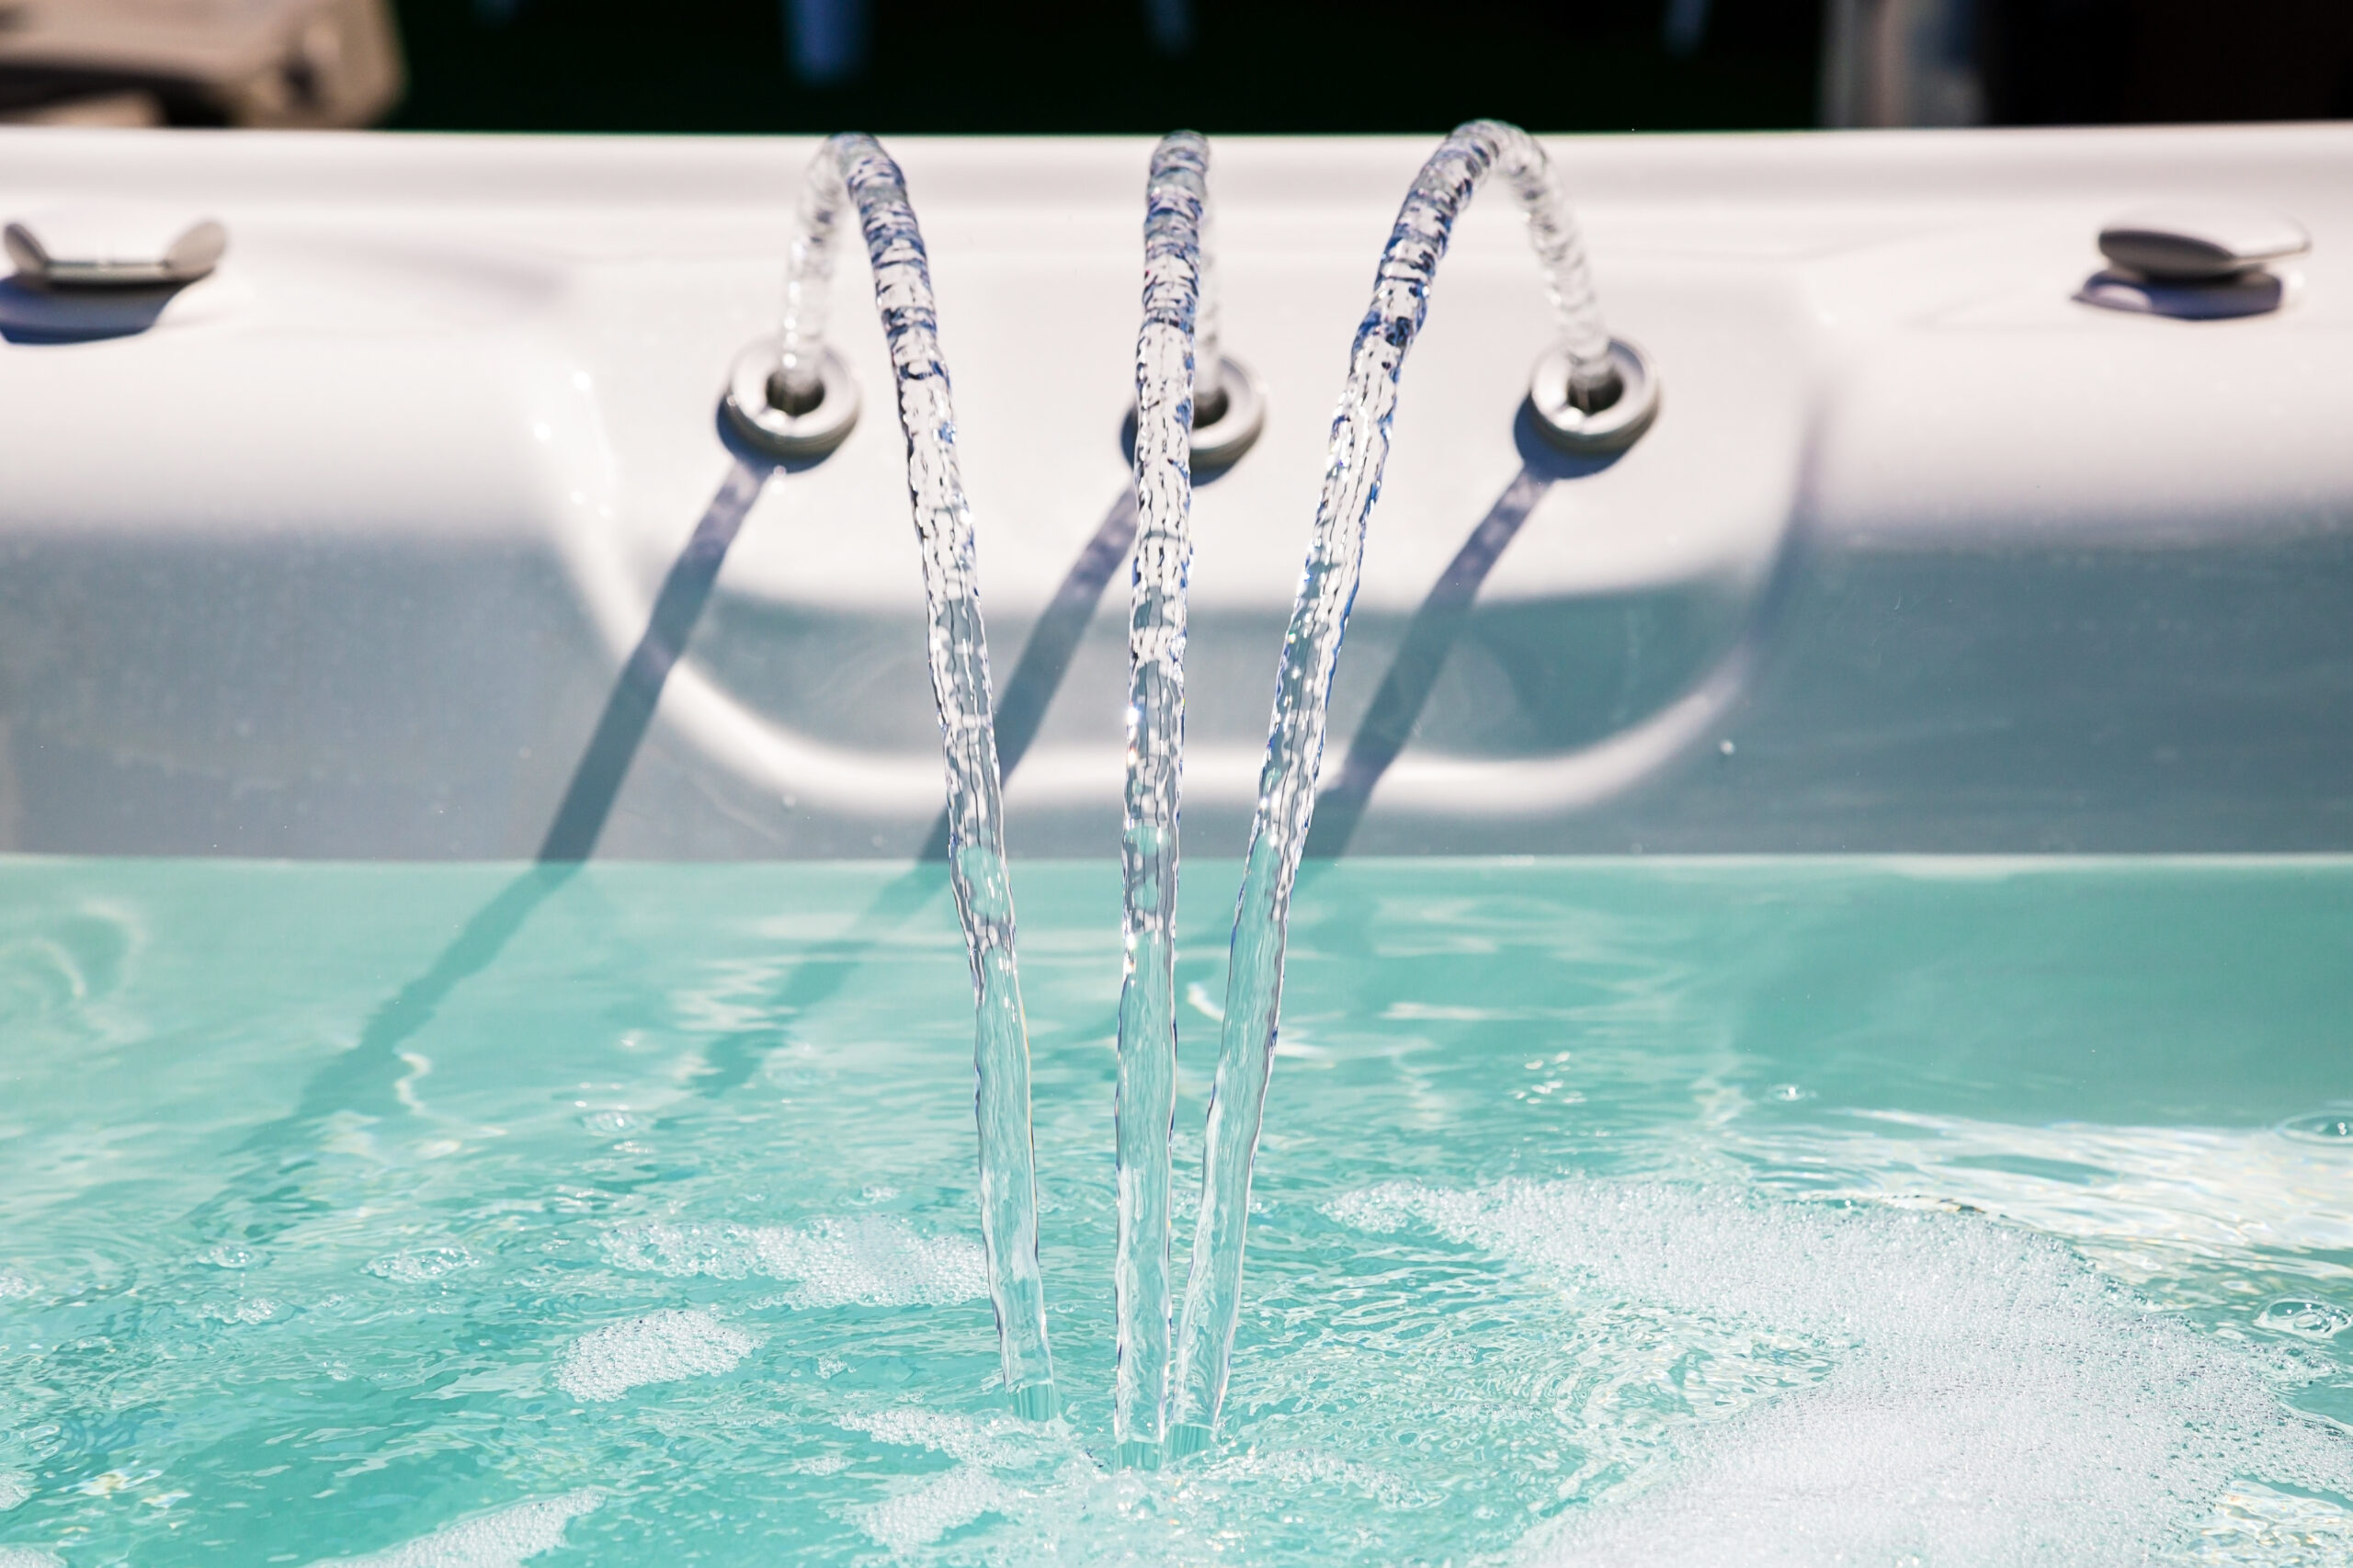 High Pressure Water Jet In An Individual Spa